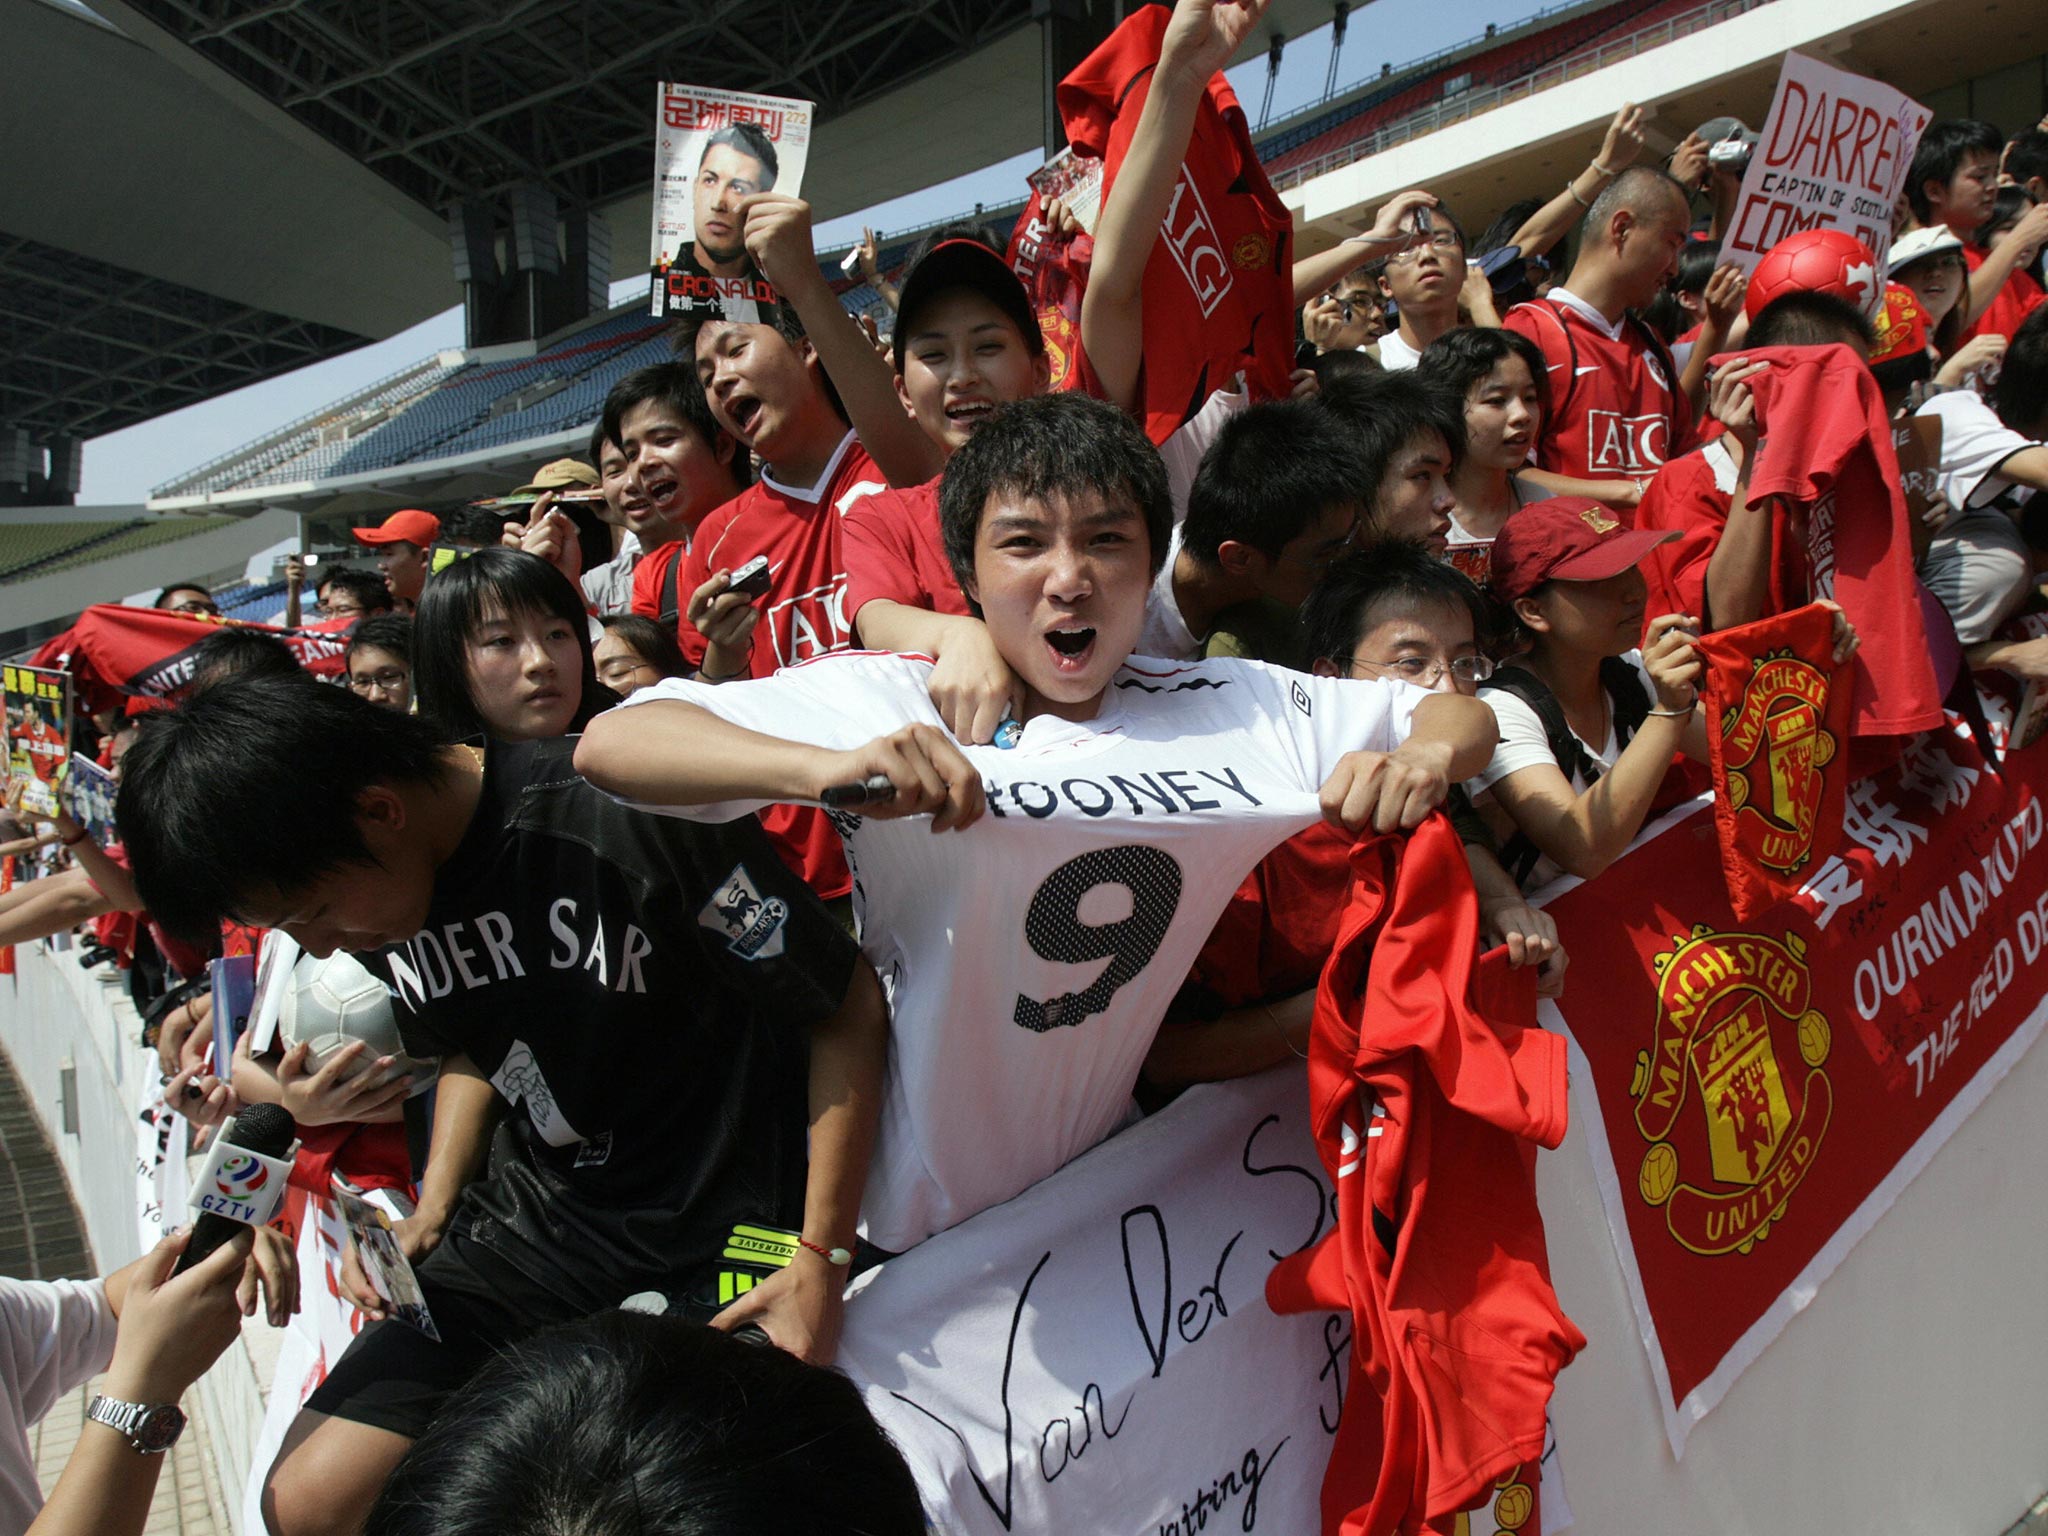 The Rooney brand extends to China, where fans sport the Manchester United player’s image